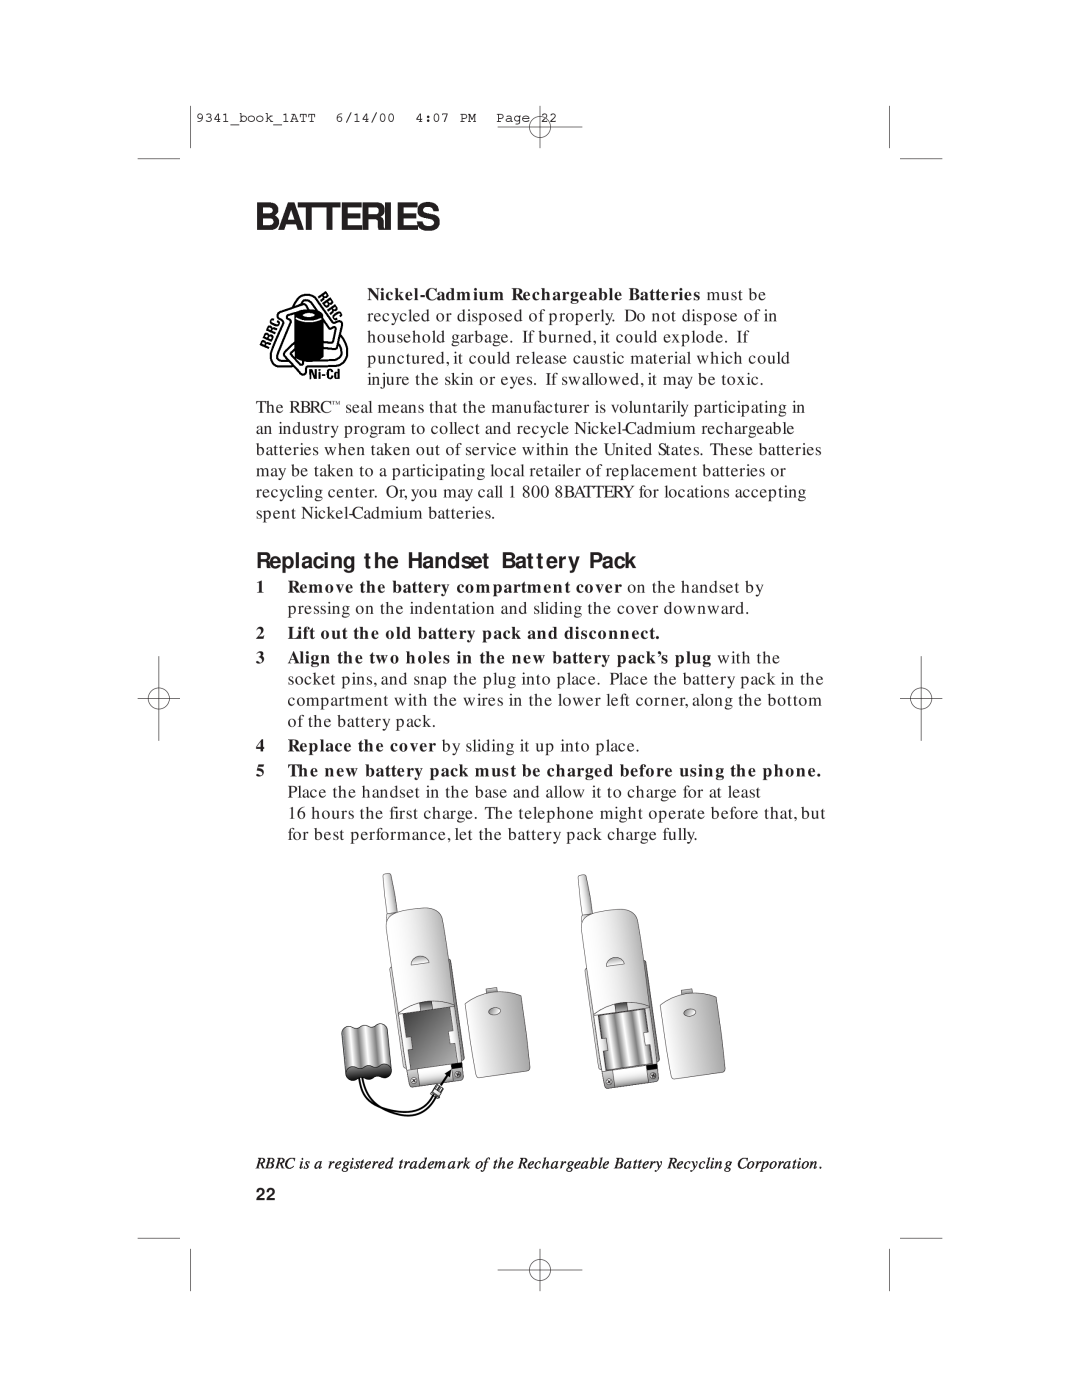 AT&T 9341 user manual Replacing the Handset Battery Pack, Lift out the old battery pack and disconnect, Batteries 